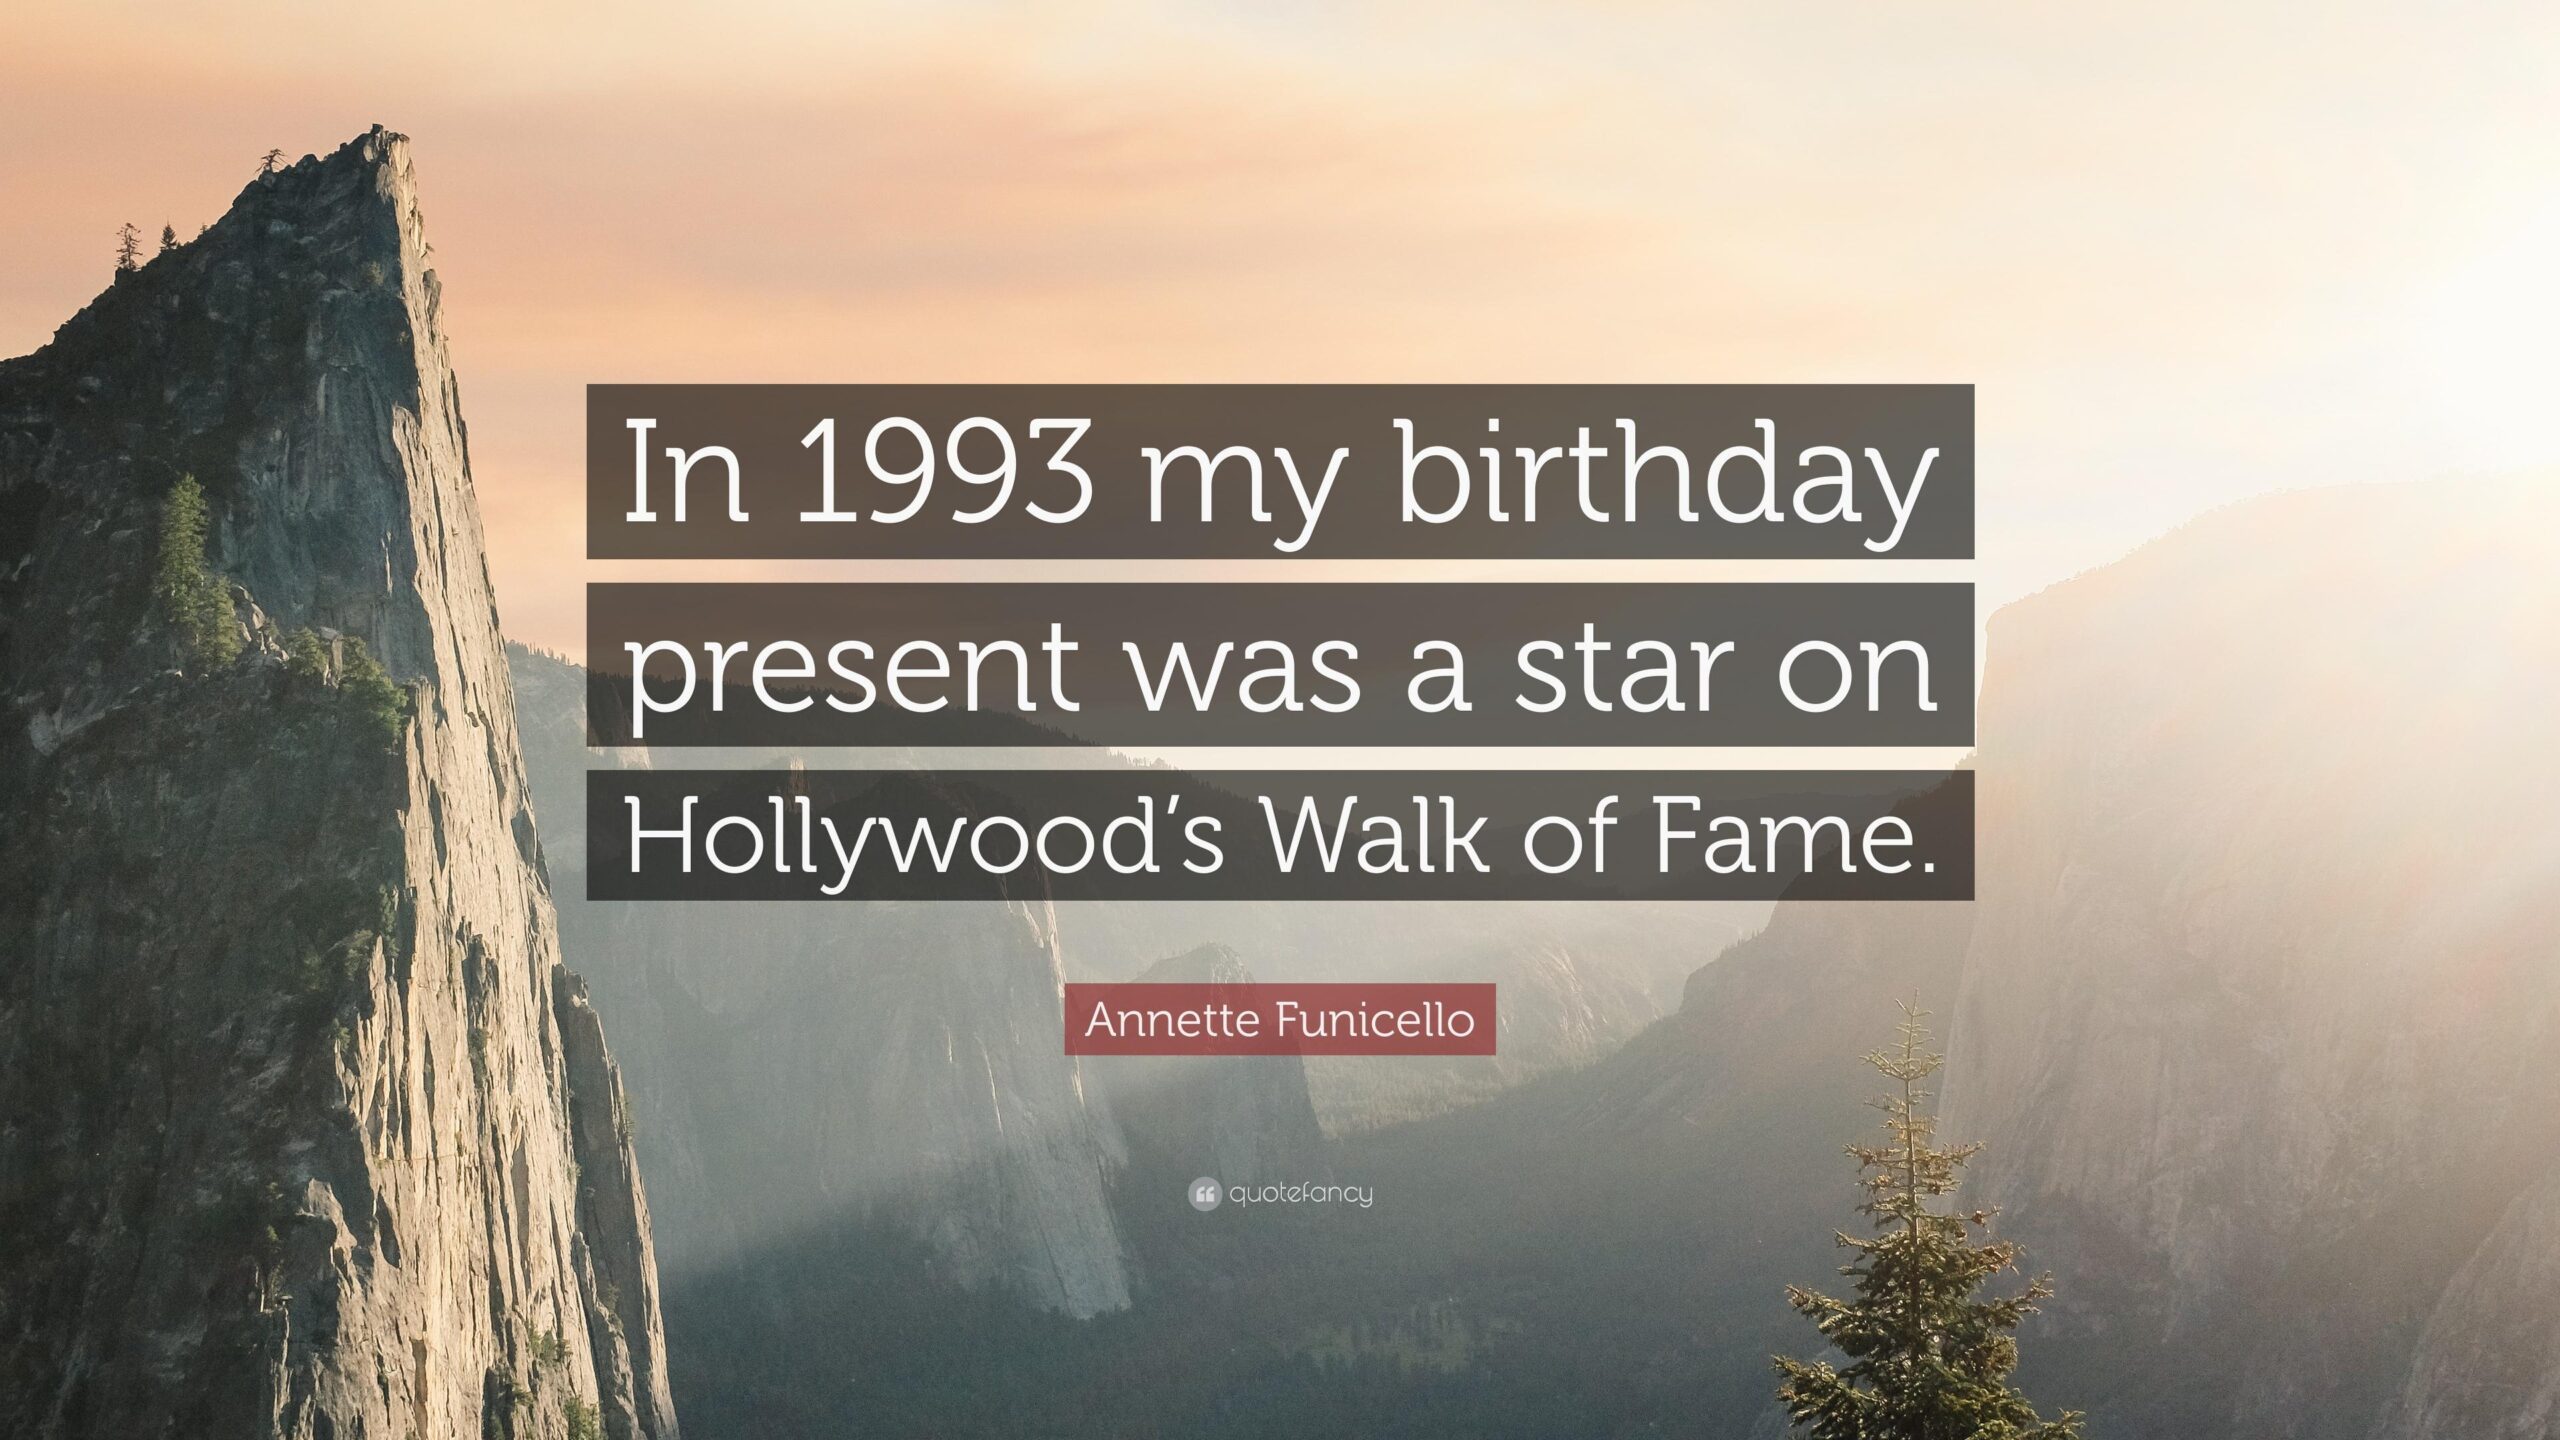 Annette Funicello Quote “In my birthday present was a star on